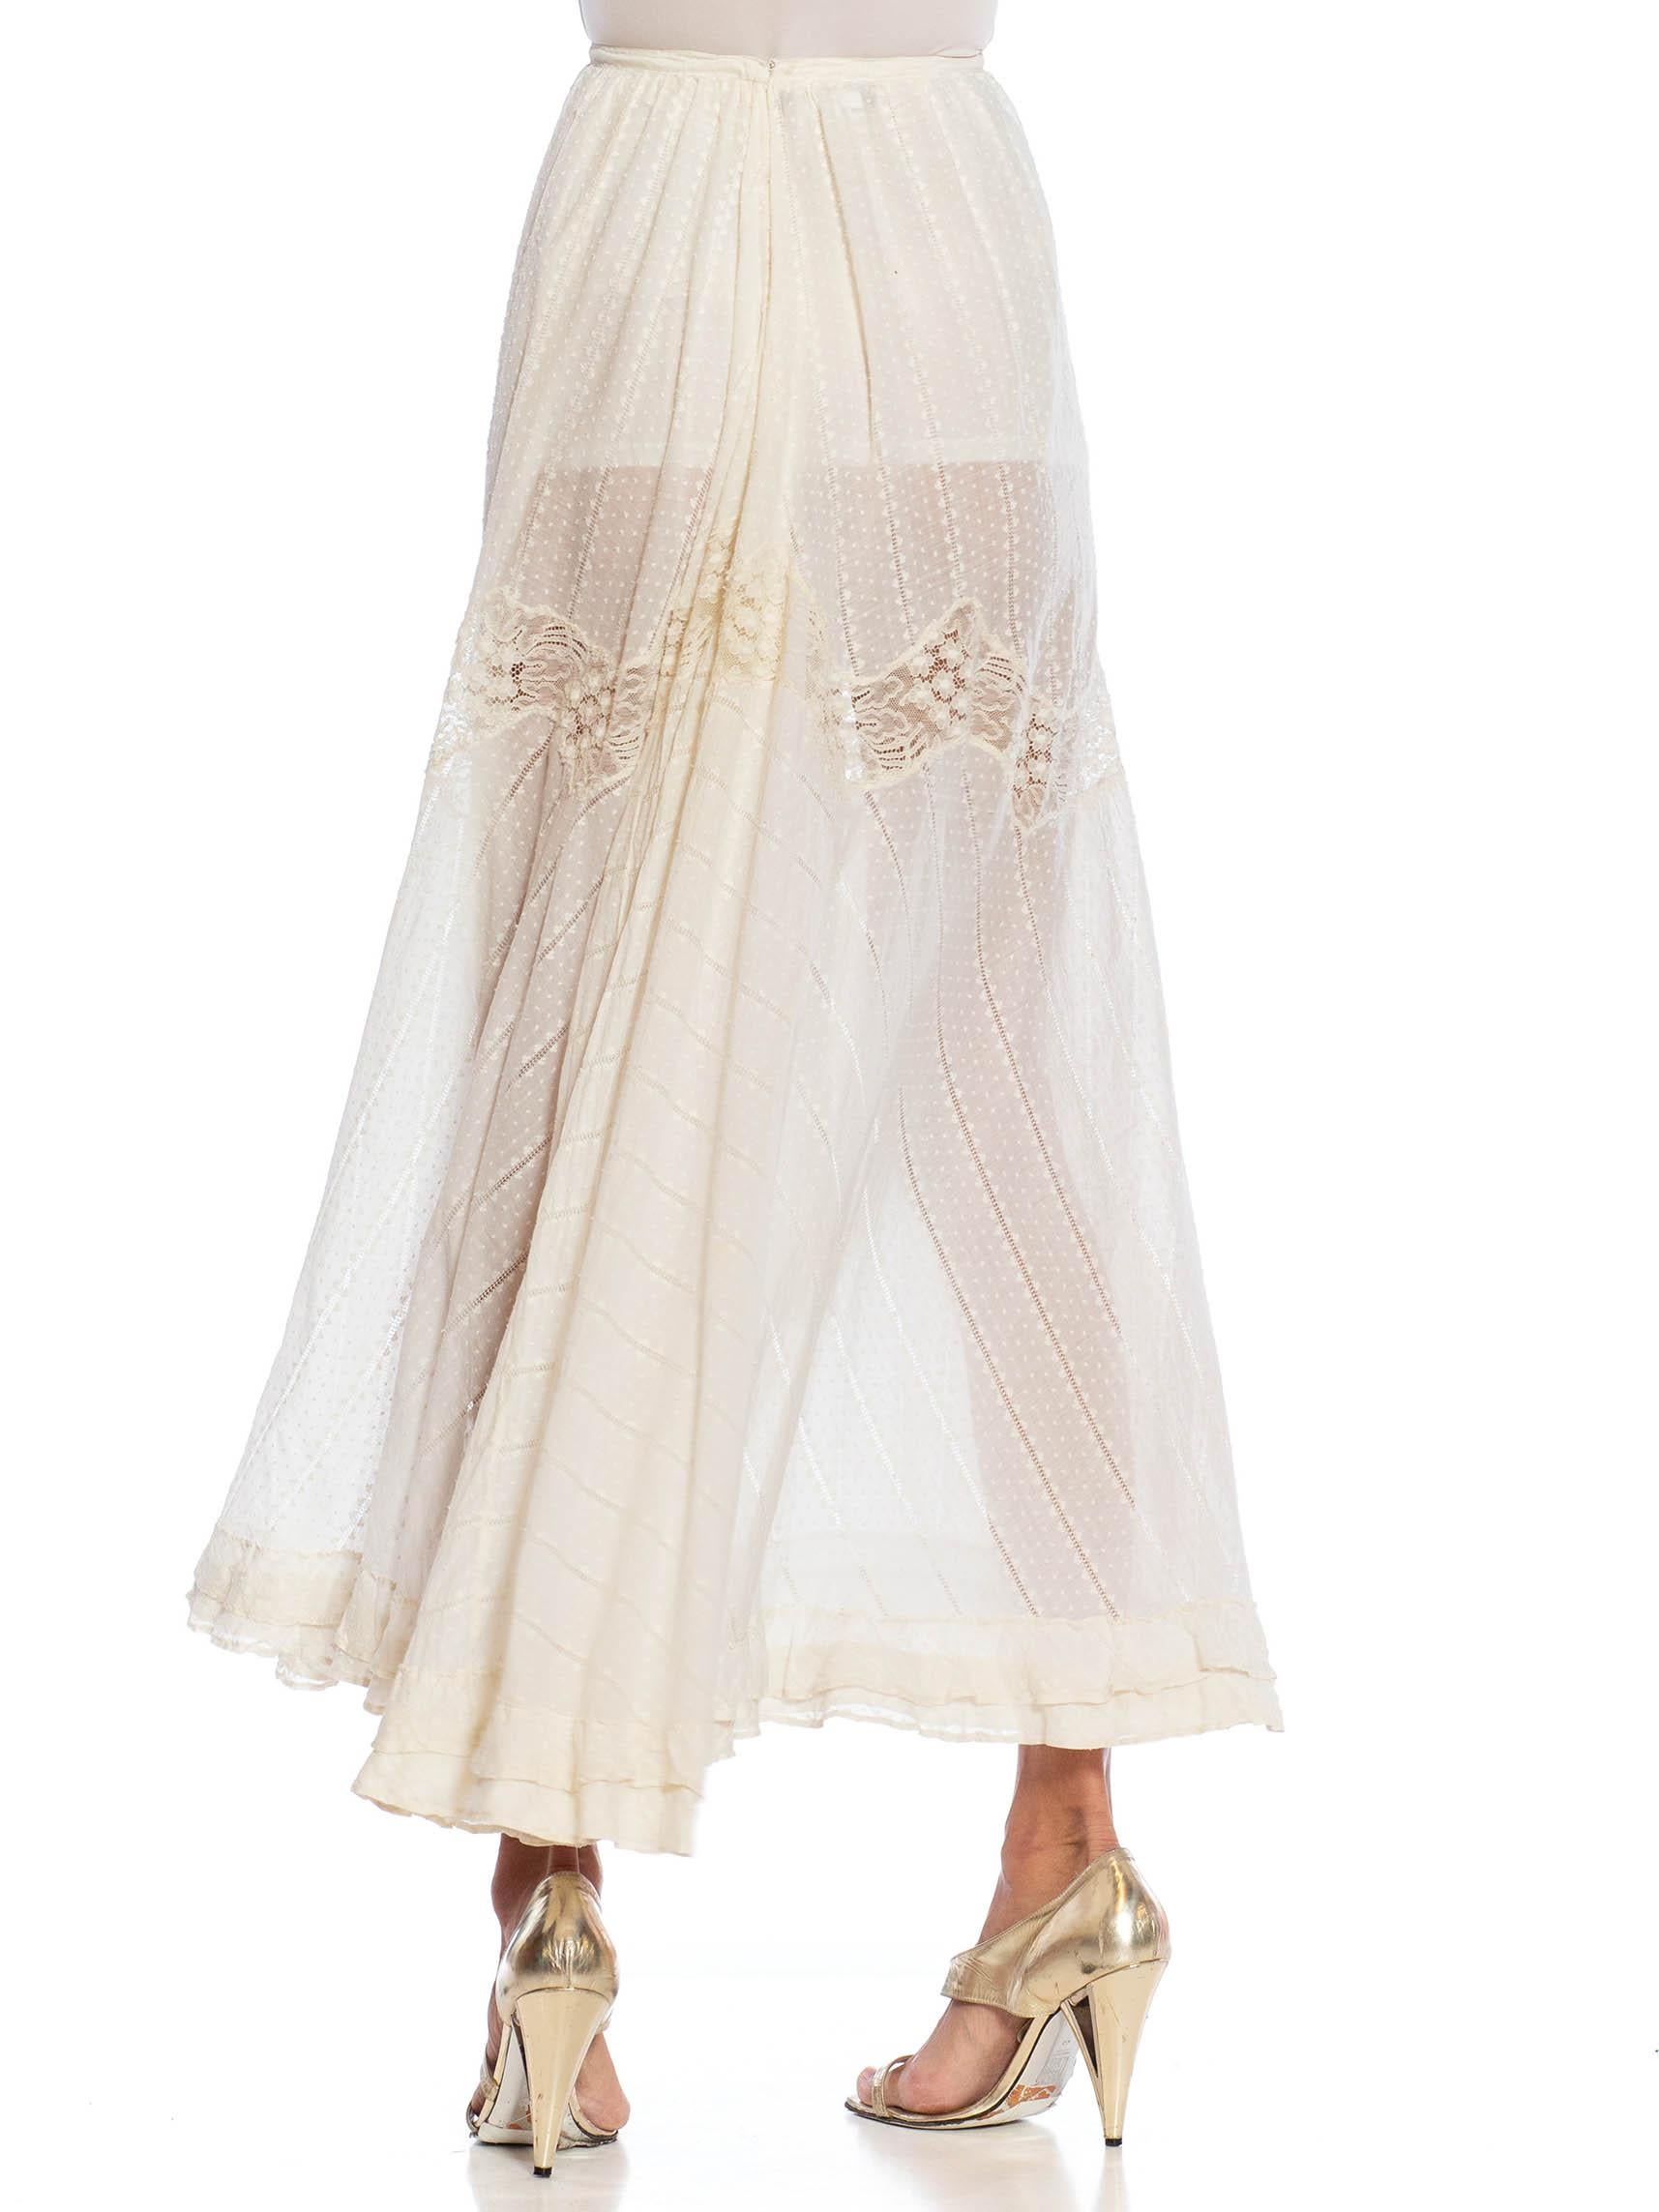 Victorian Ivory Organic Cotton & Lace Trimmed Skirt For Sale 4